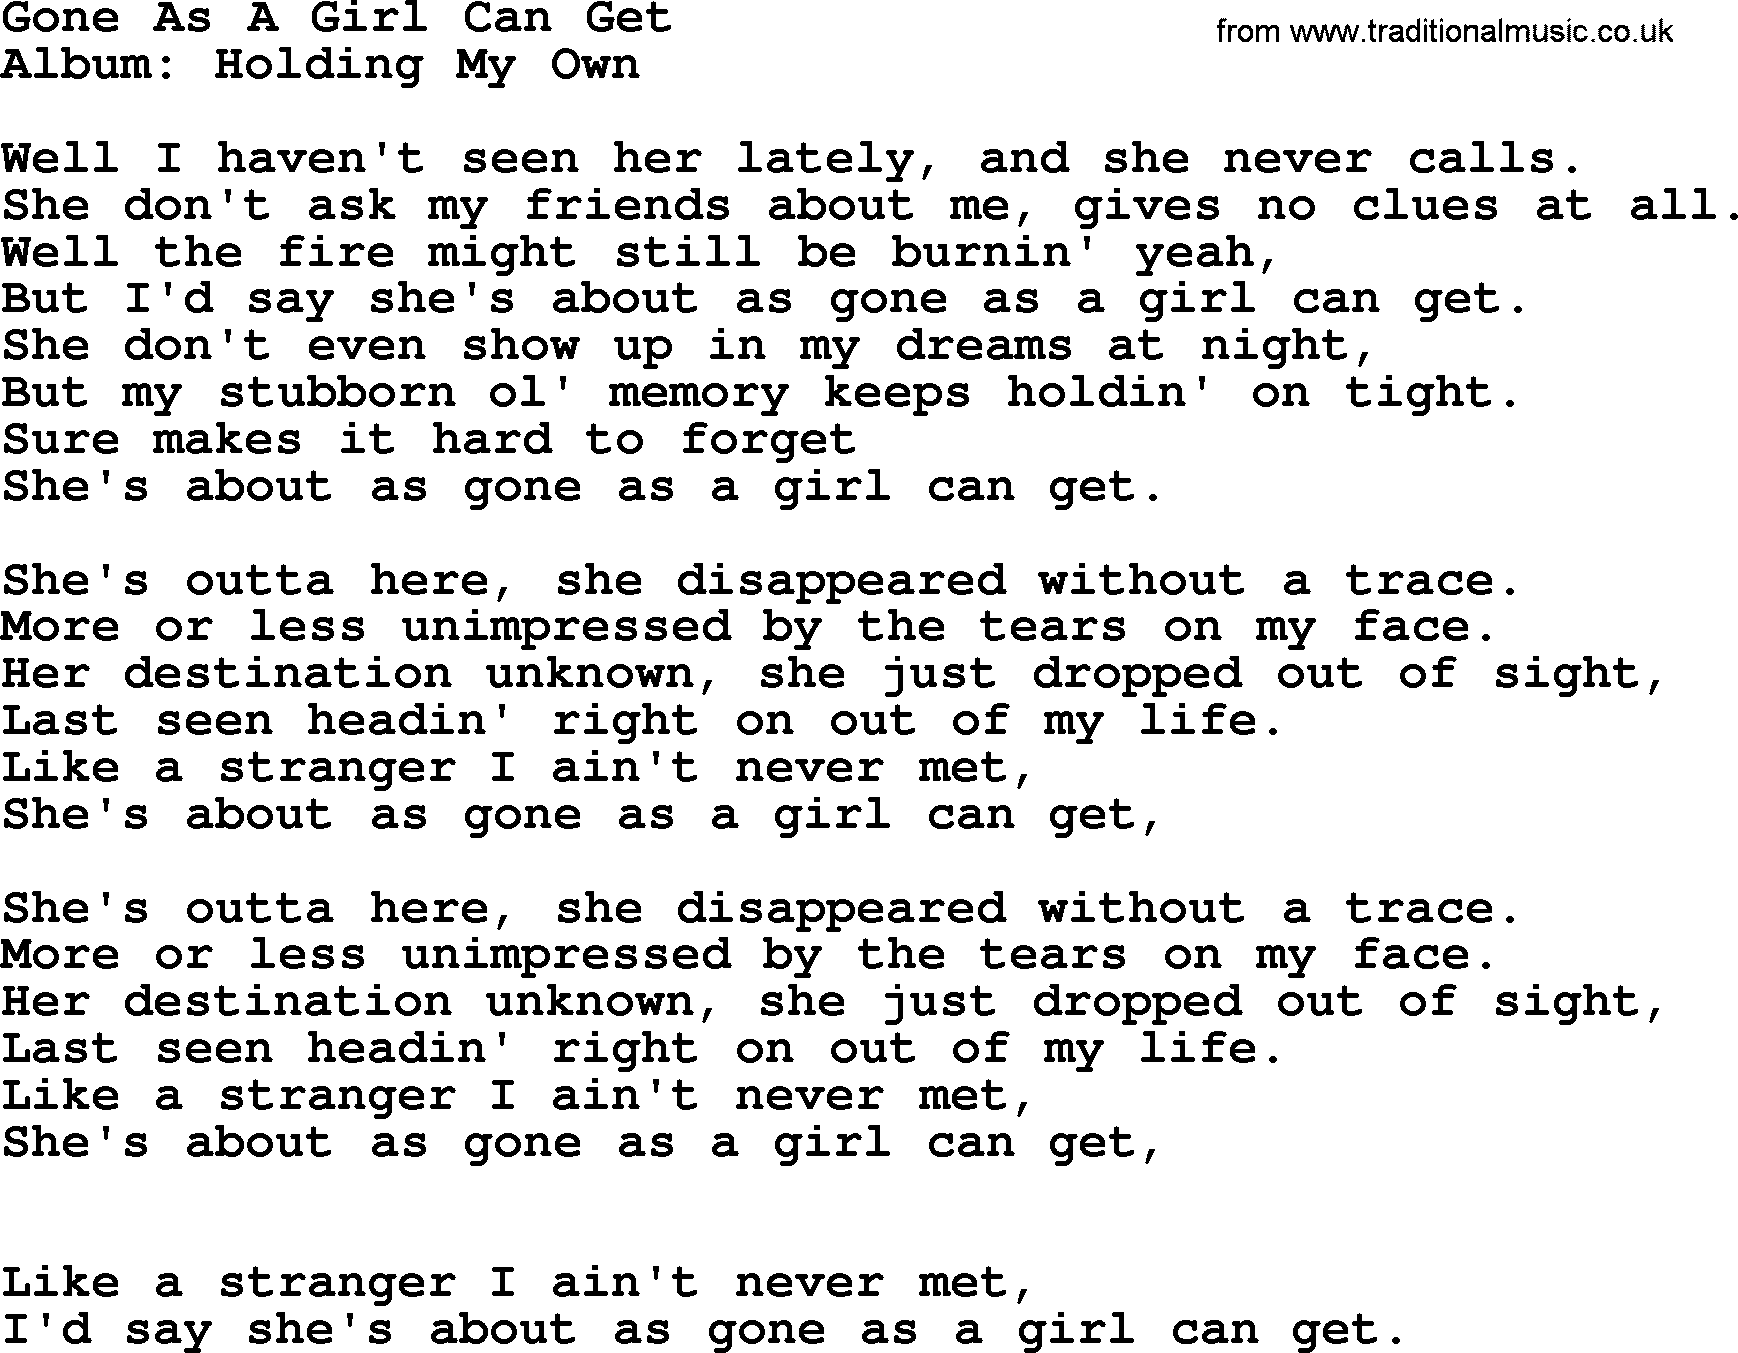 George Strait song: Gone As A Girl Can Get, lyrics